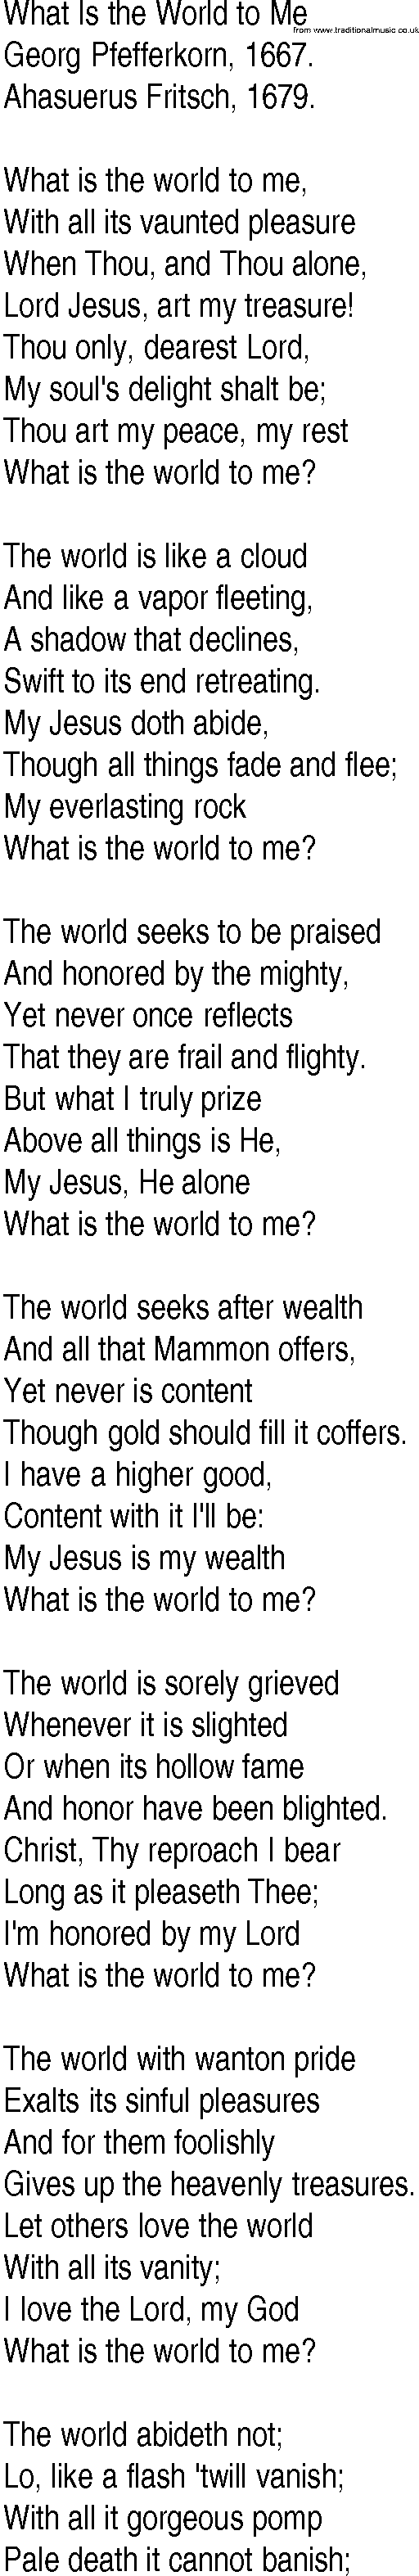 Hymn and Gospel Song: What Is the World to Me by Georg Pfefferkorn lyrics